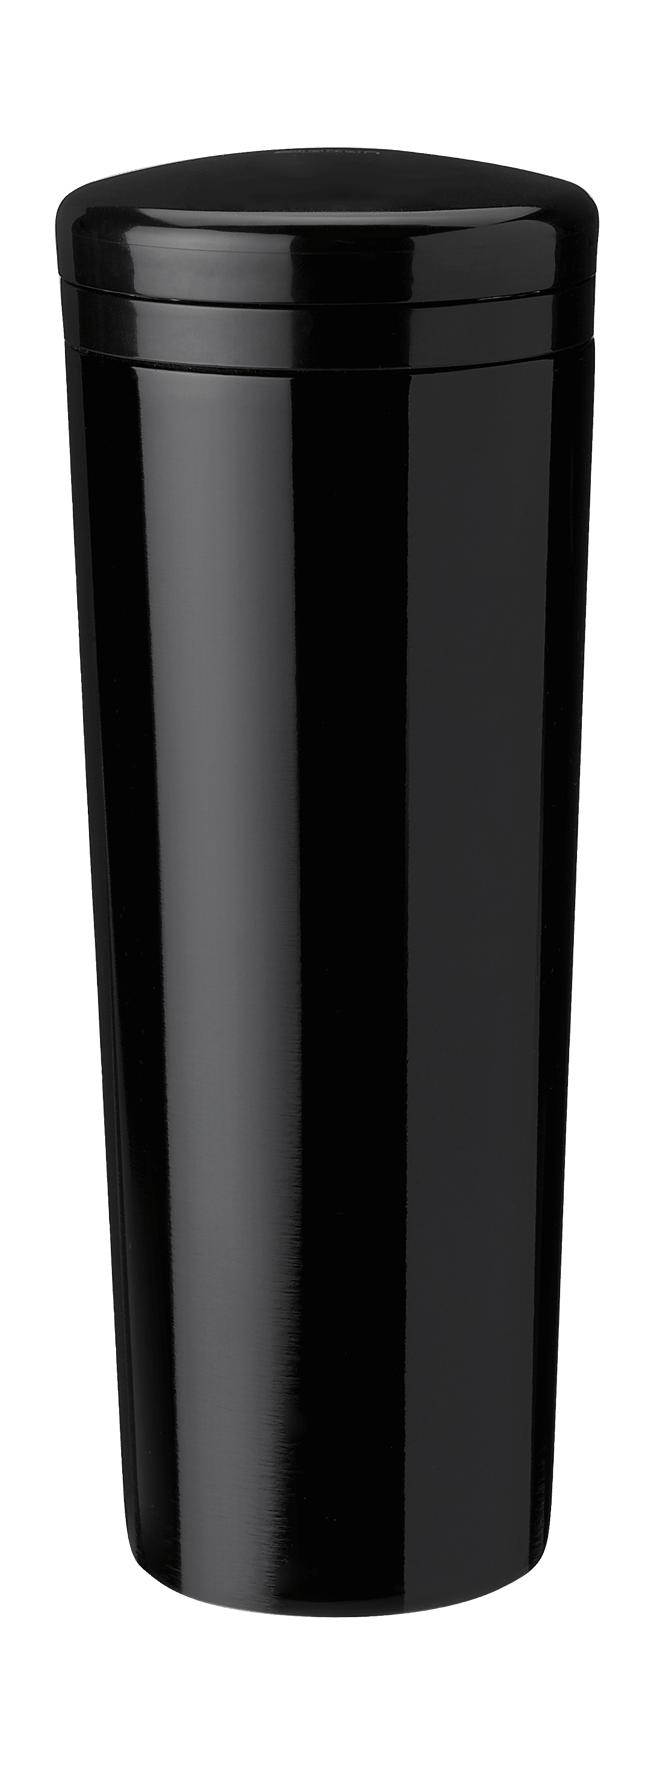 Stelton Carrie Thermos -pullo 0,5 L, musta